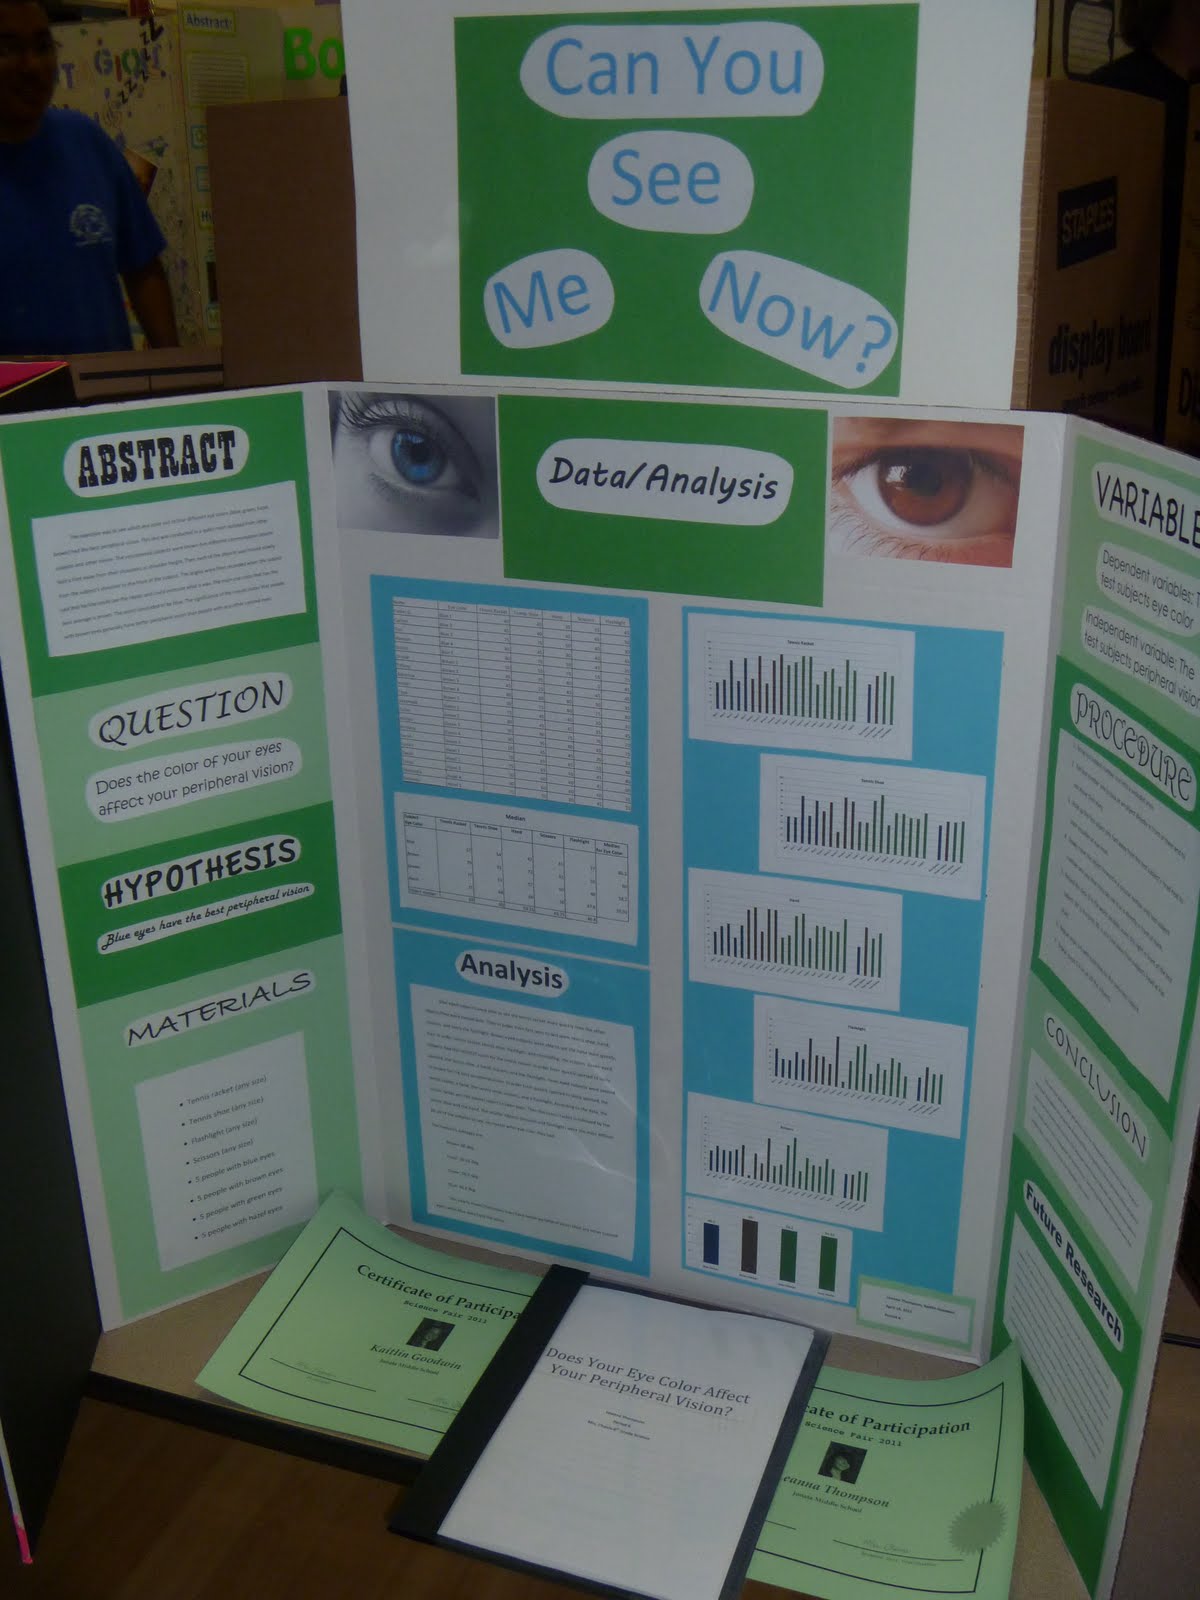 Ducks, Martians, and Cupcakes: My 8th grade Science Fair Project